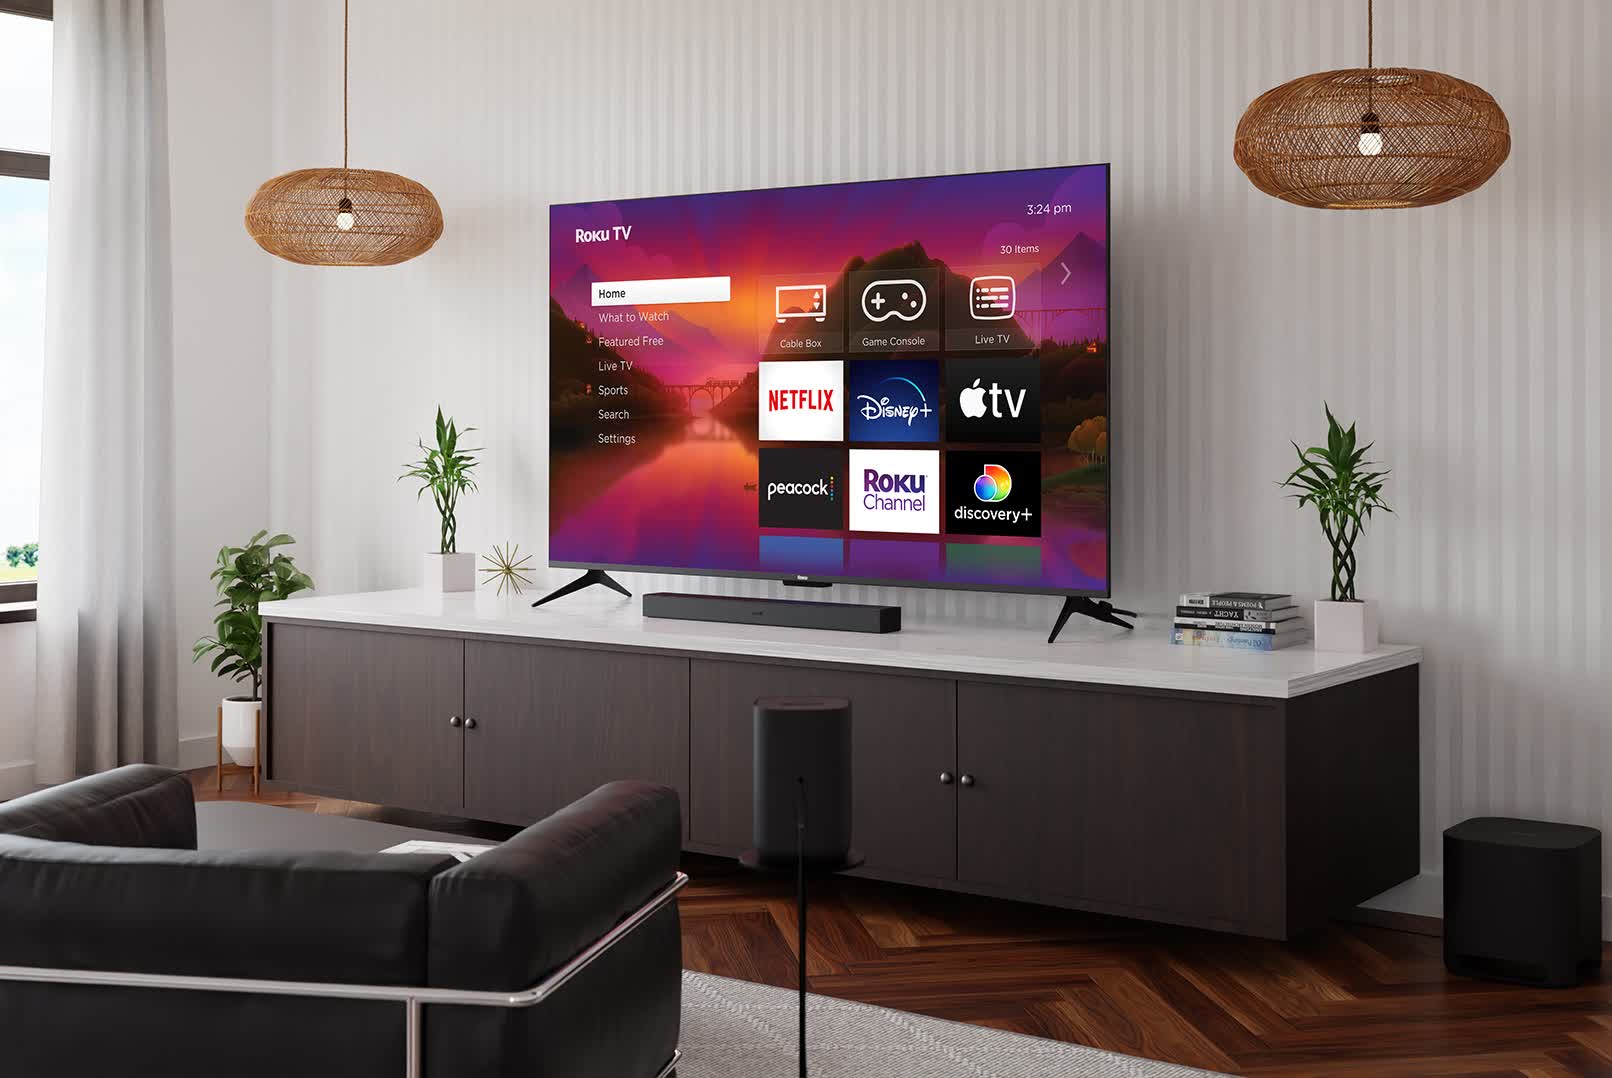 Roku's first in-house TVs launch at Best Buy starting at $150